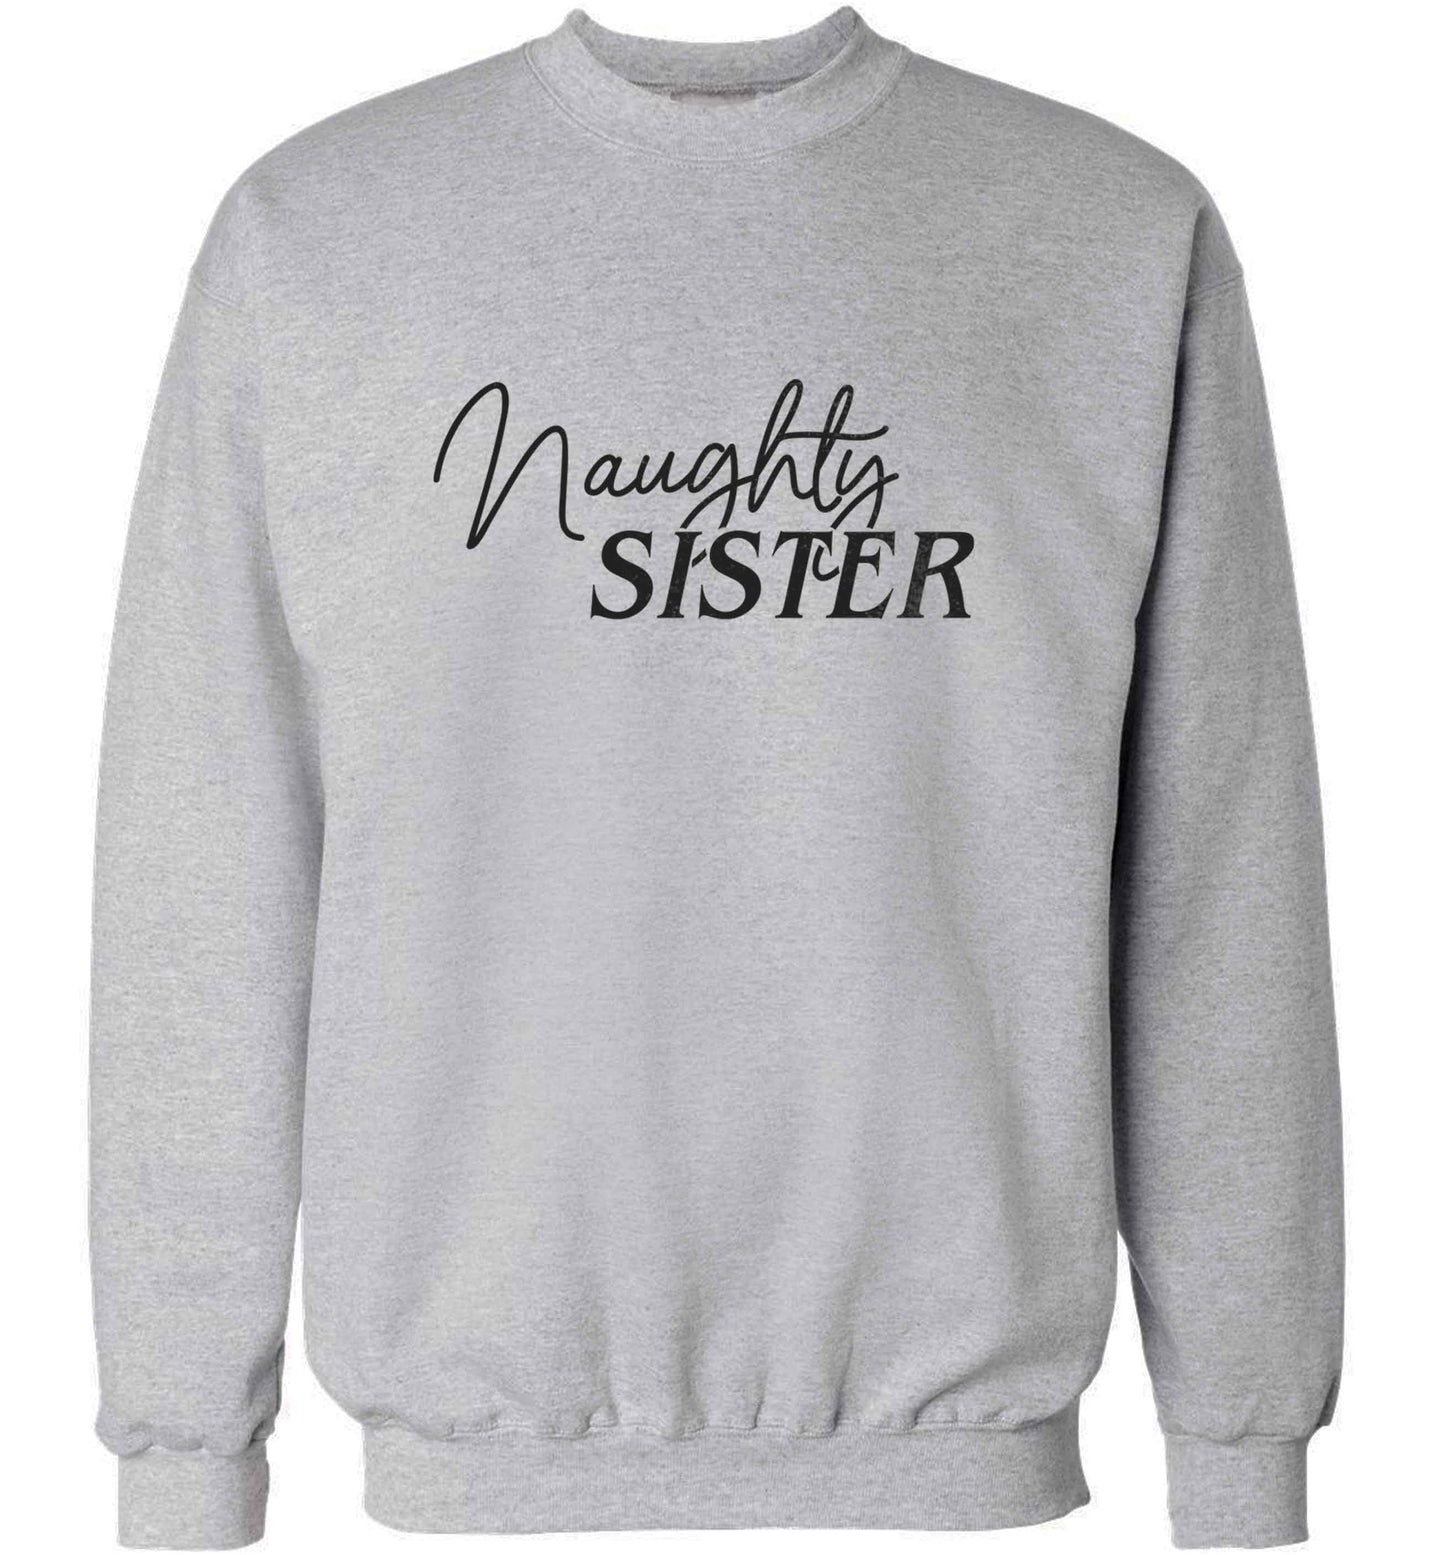 Naughty Sister adult's unisex grey sweater 2XL